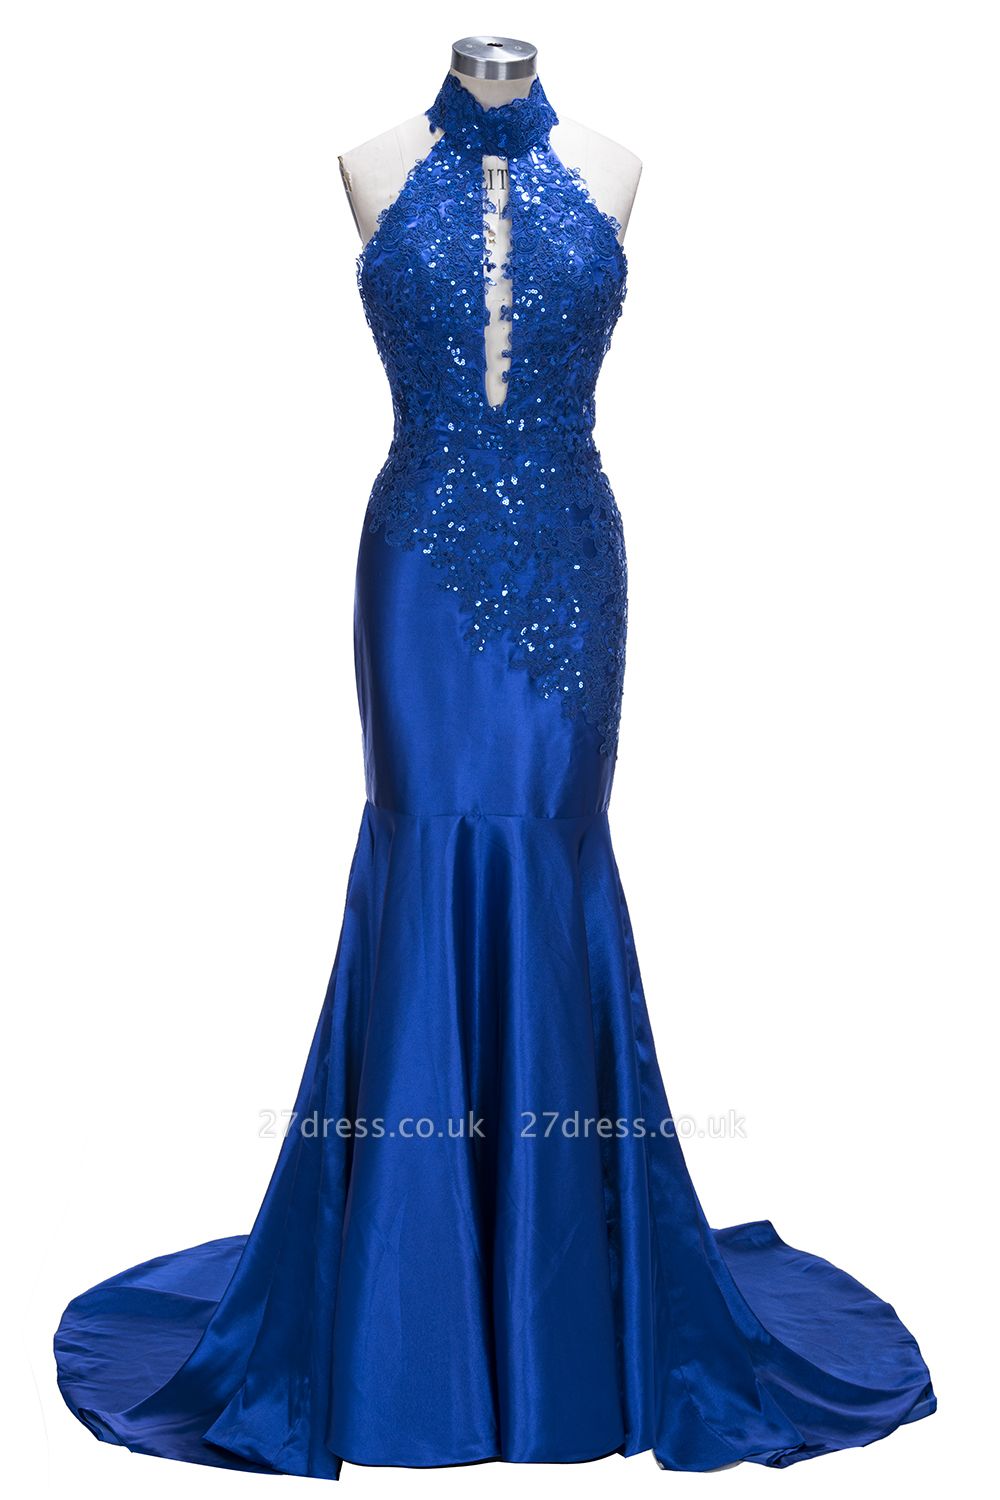 Mermaid Floor Length Sexy Keyhole Evening Gowns UK | Sequins Prom Dress Online